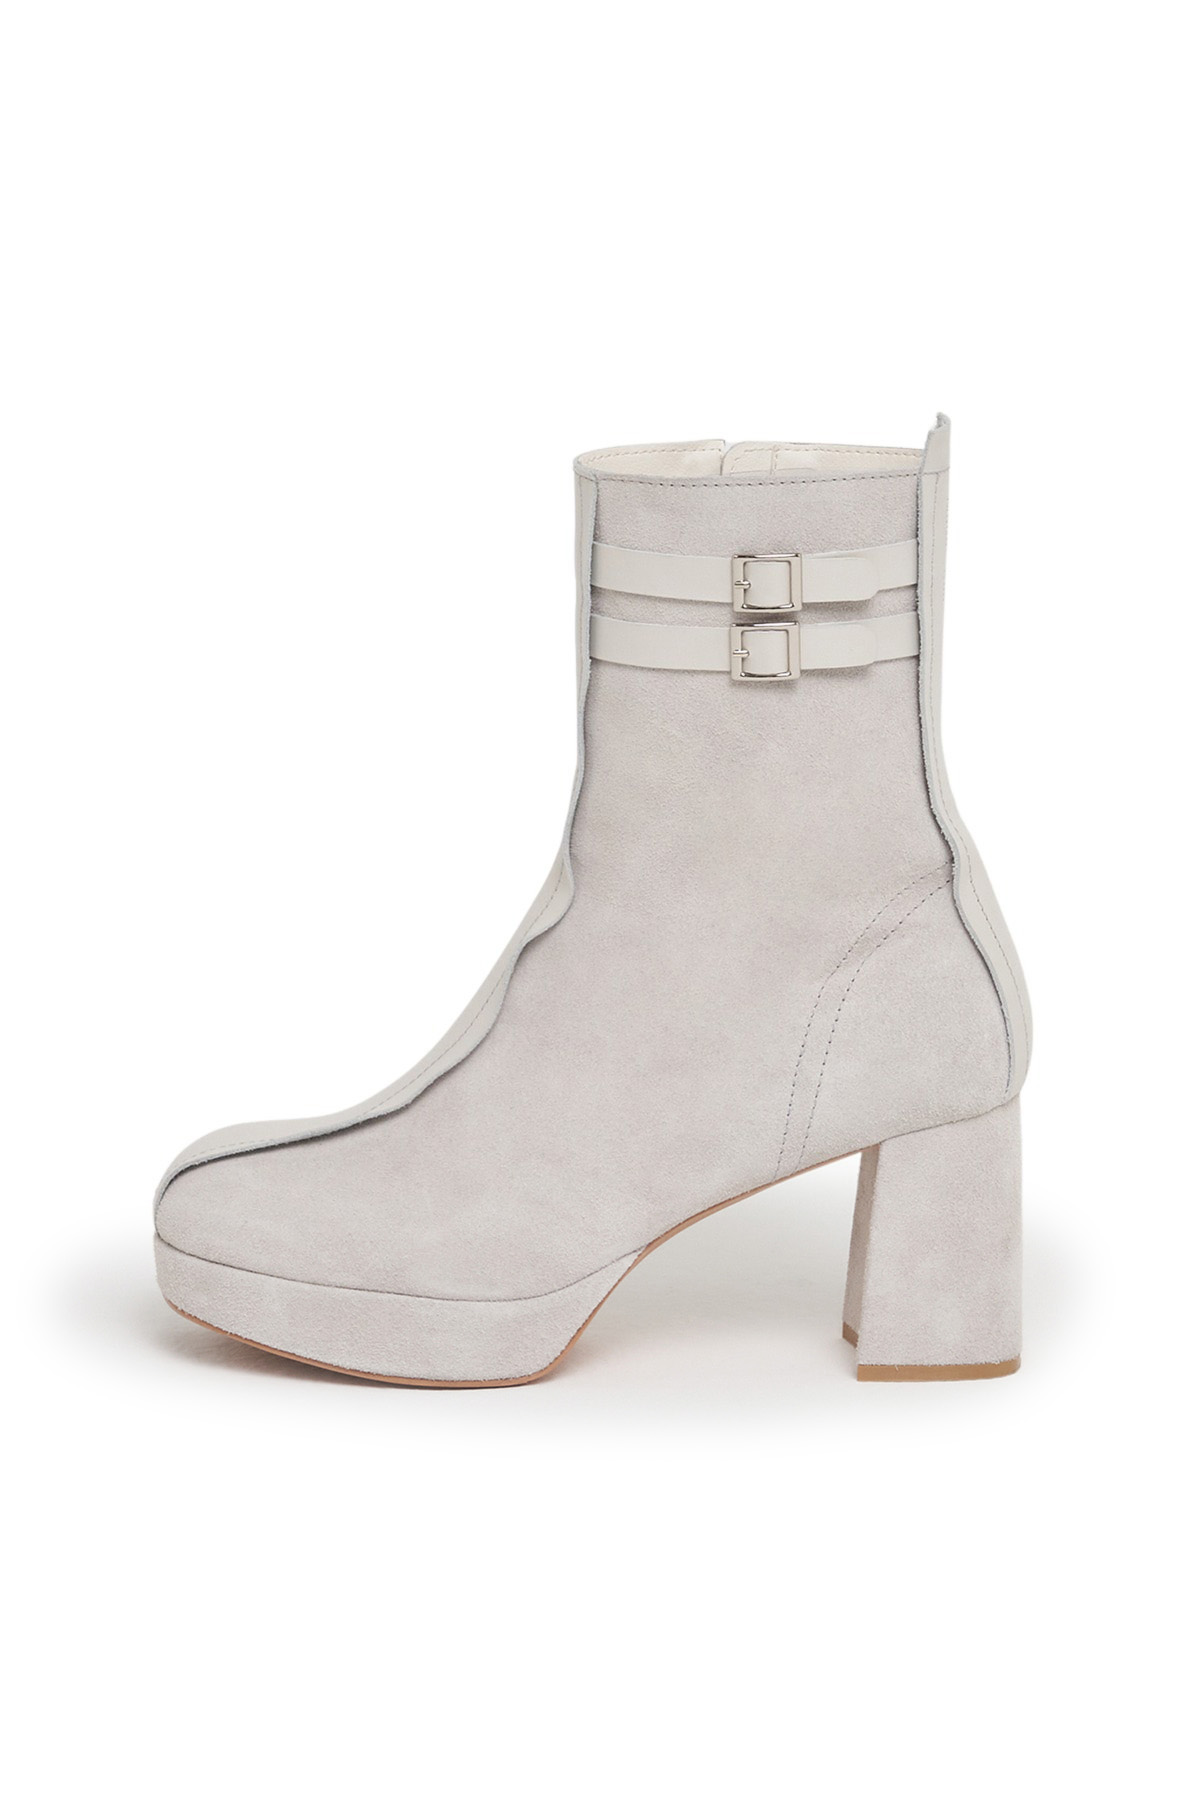 ROUND ANKLE BOOTS IN LIGHTGREY